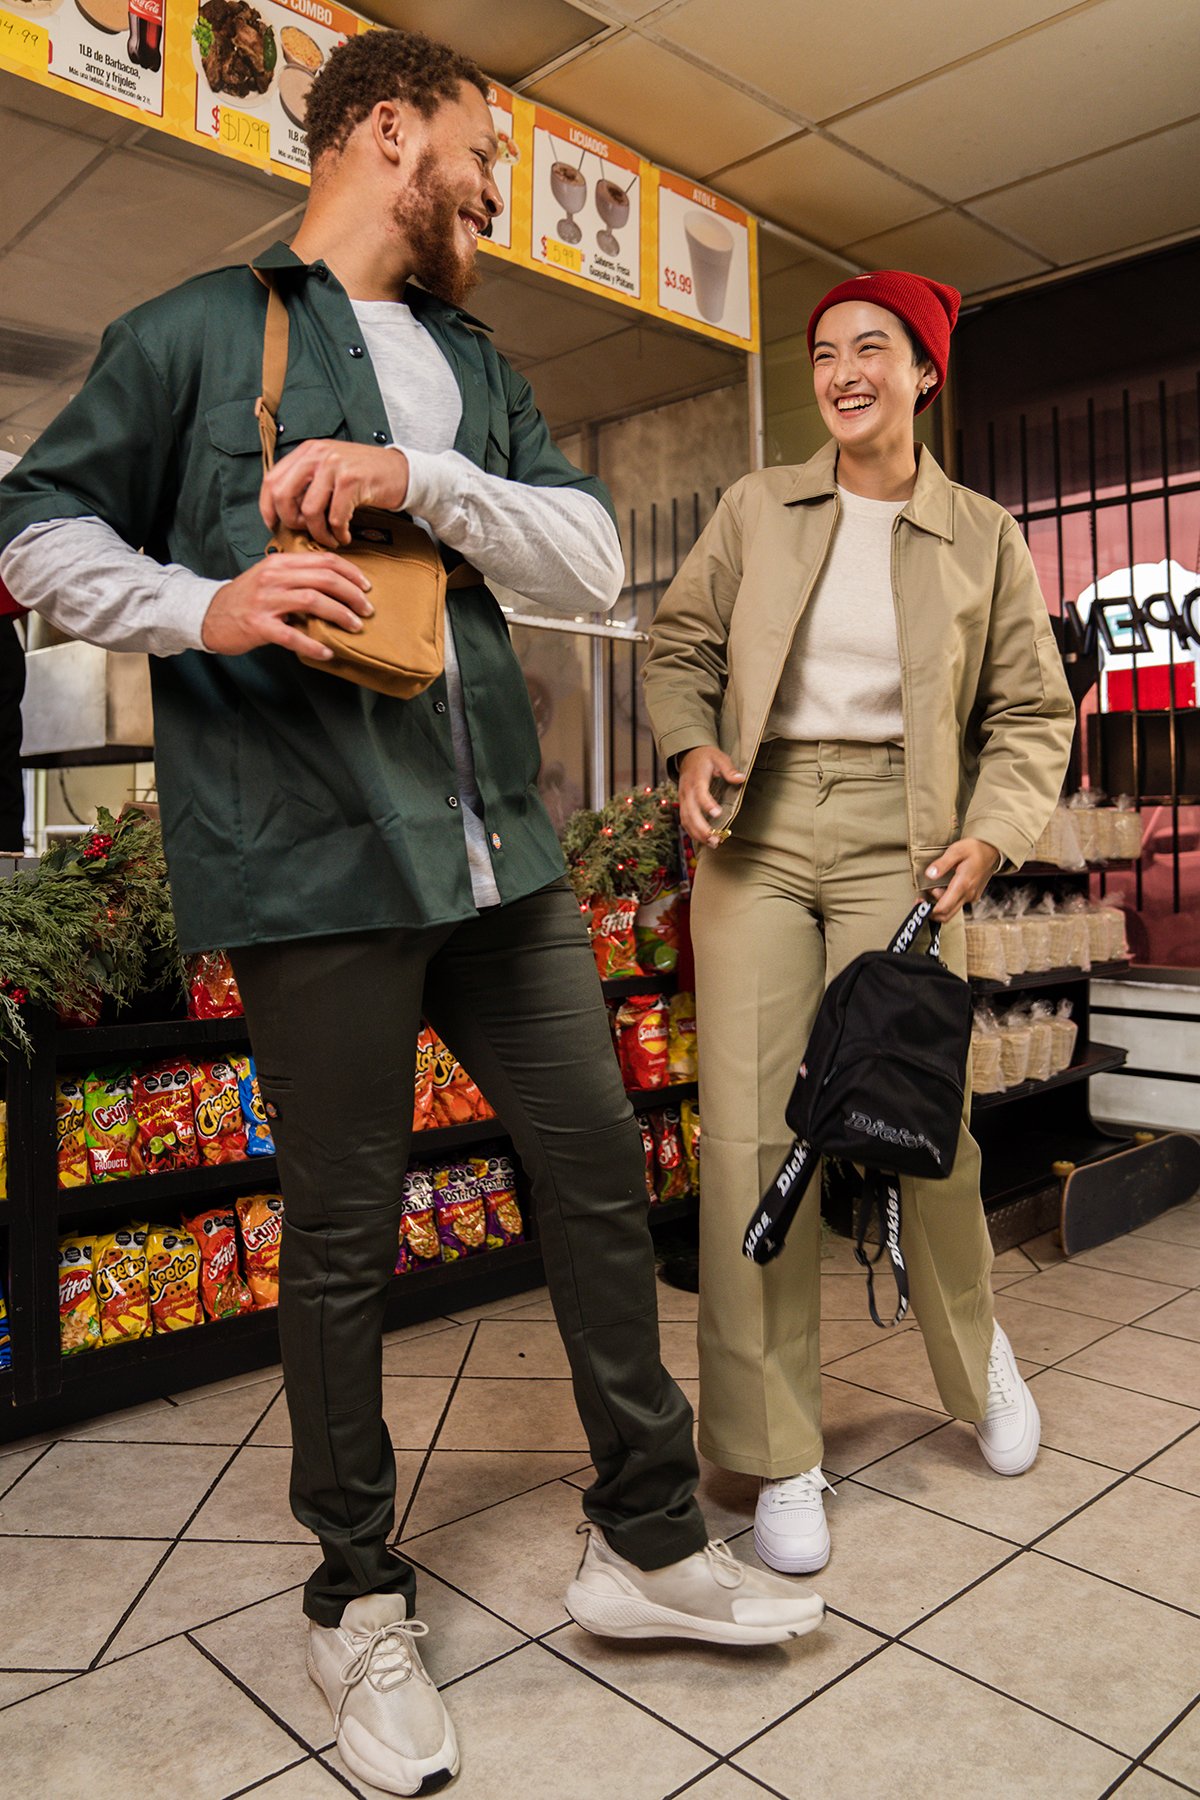 Dickies® on Twitter: and hers Matched Shop the Dickies Suit for you and your SO. https://t.co/7D8wbadKe0 to shop. https://t.co/cwJnuOt2MF" / Twitter